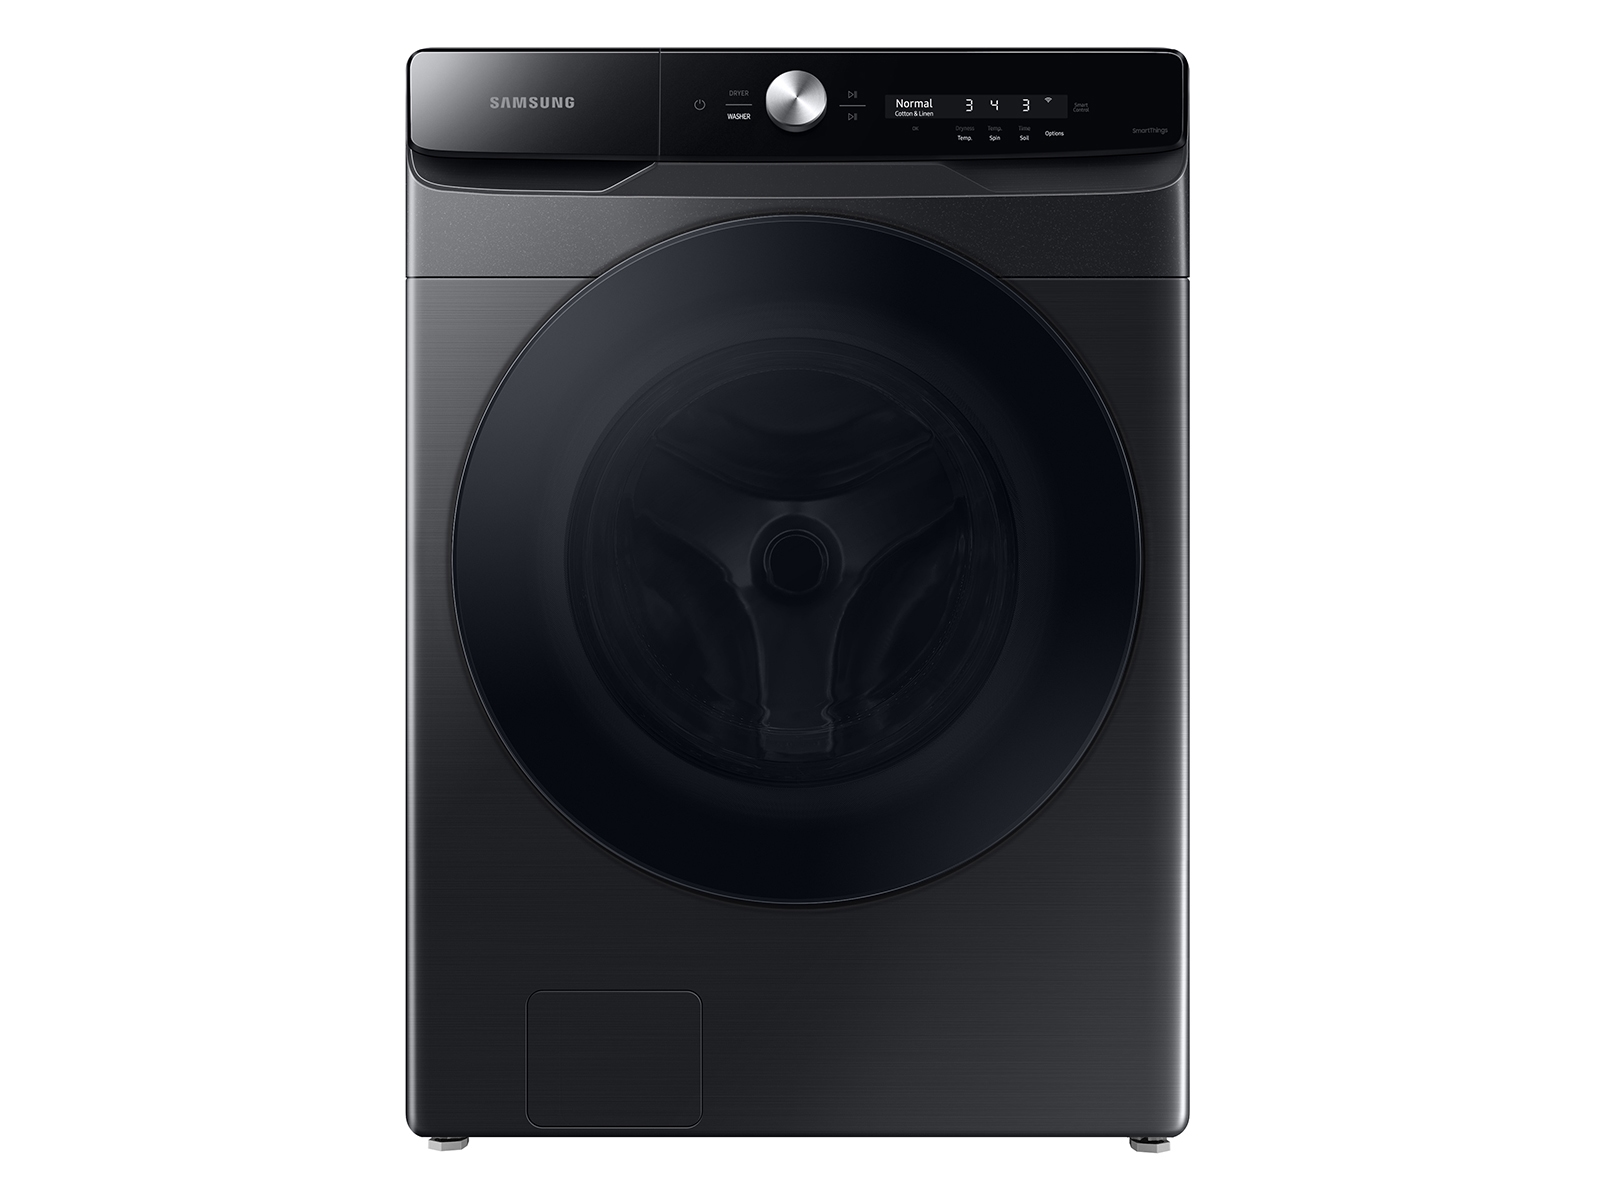 Samsung WF50A8600AV Front-load Washing Machine Review - Reviewed